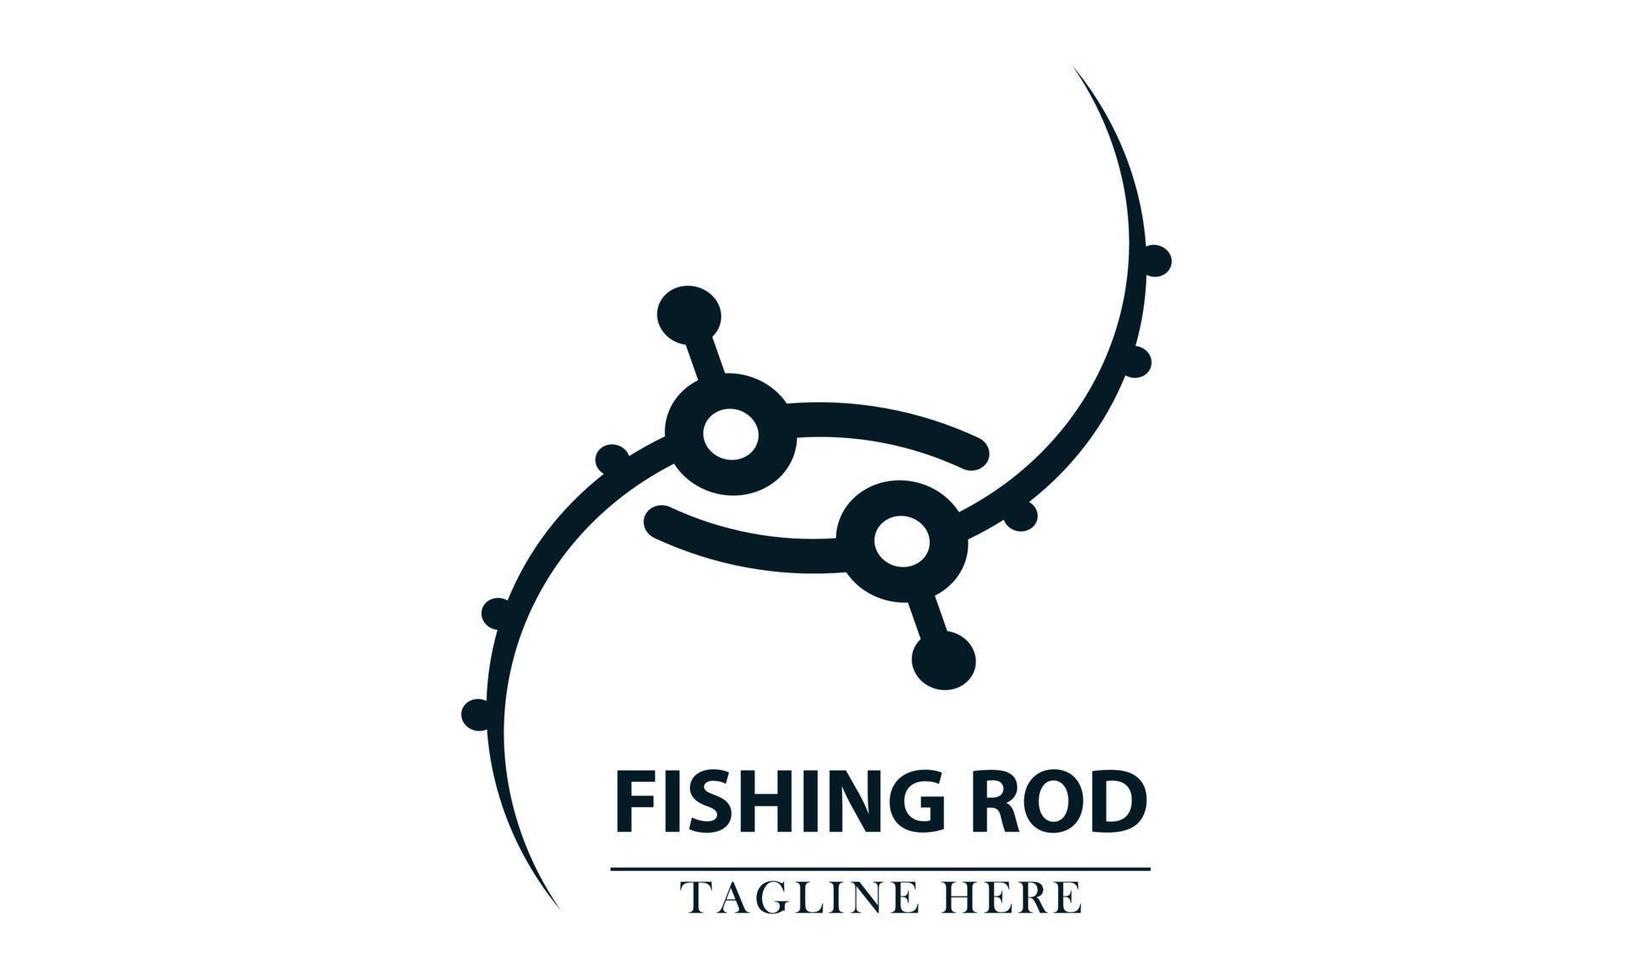 two fishing rods simple vector illustration